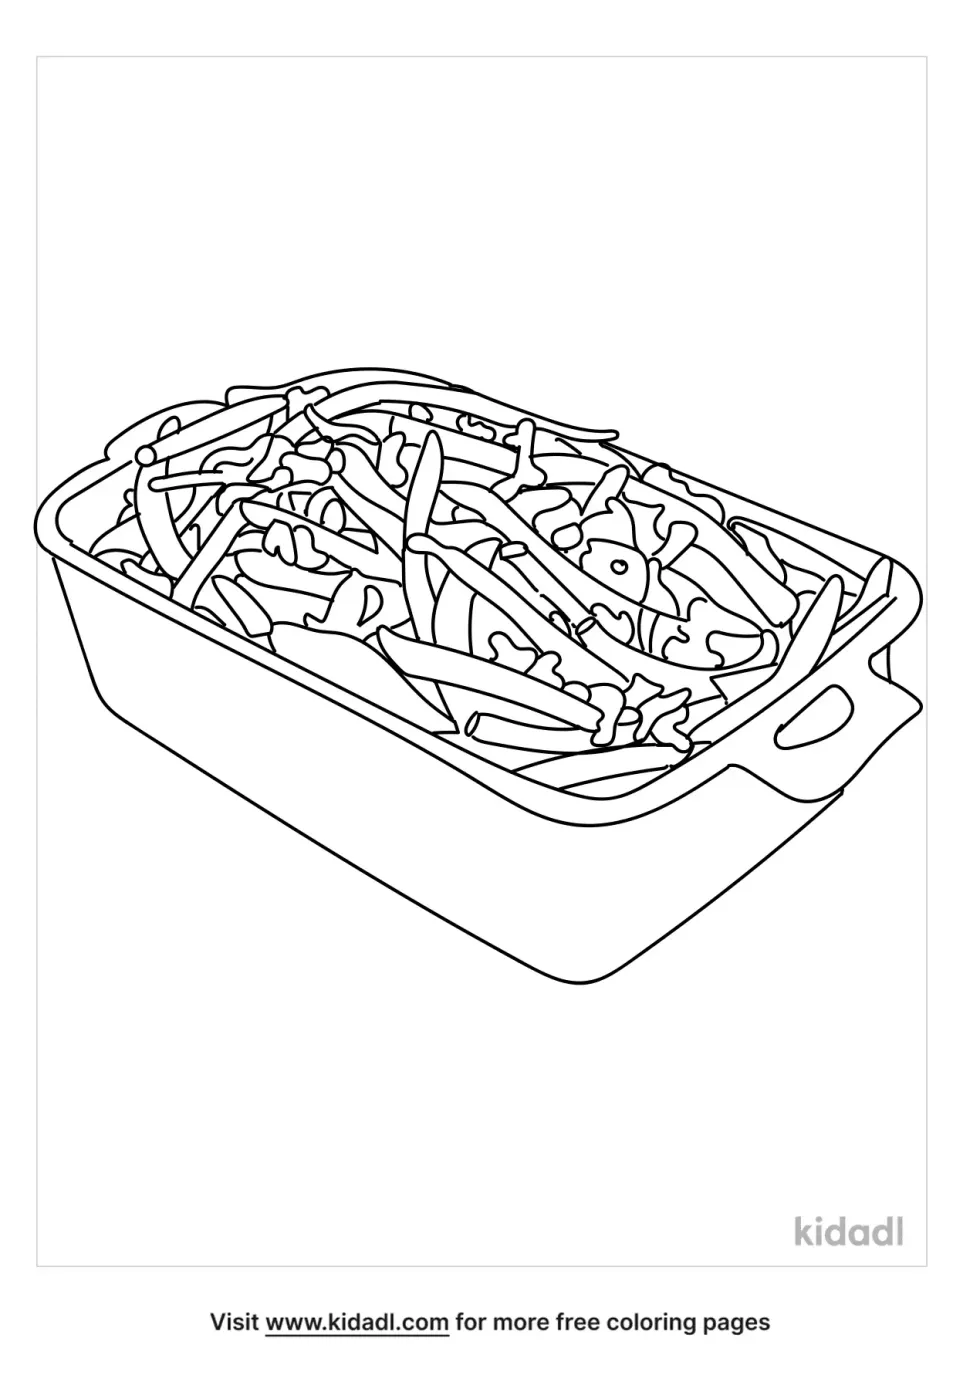 Green Bean Casserole Coloring Page